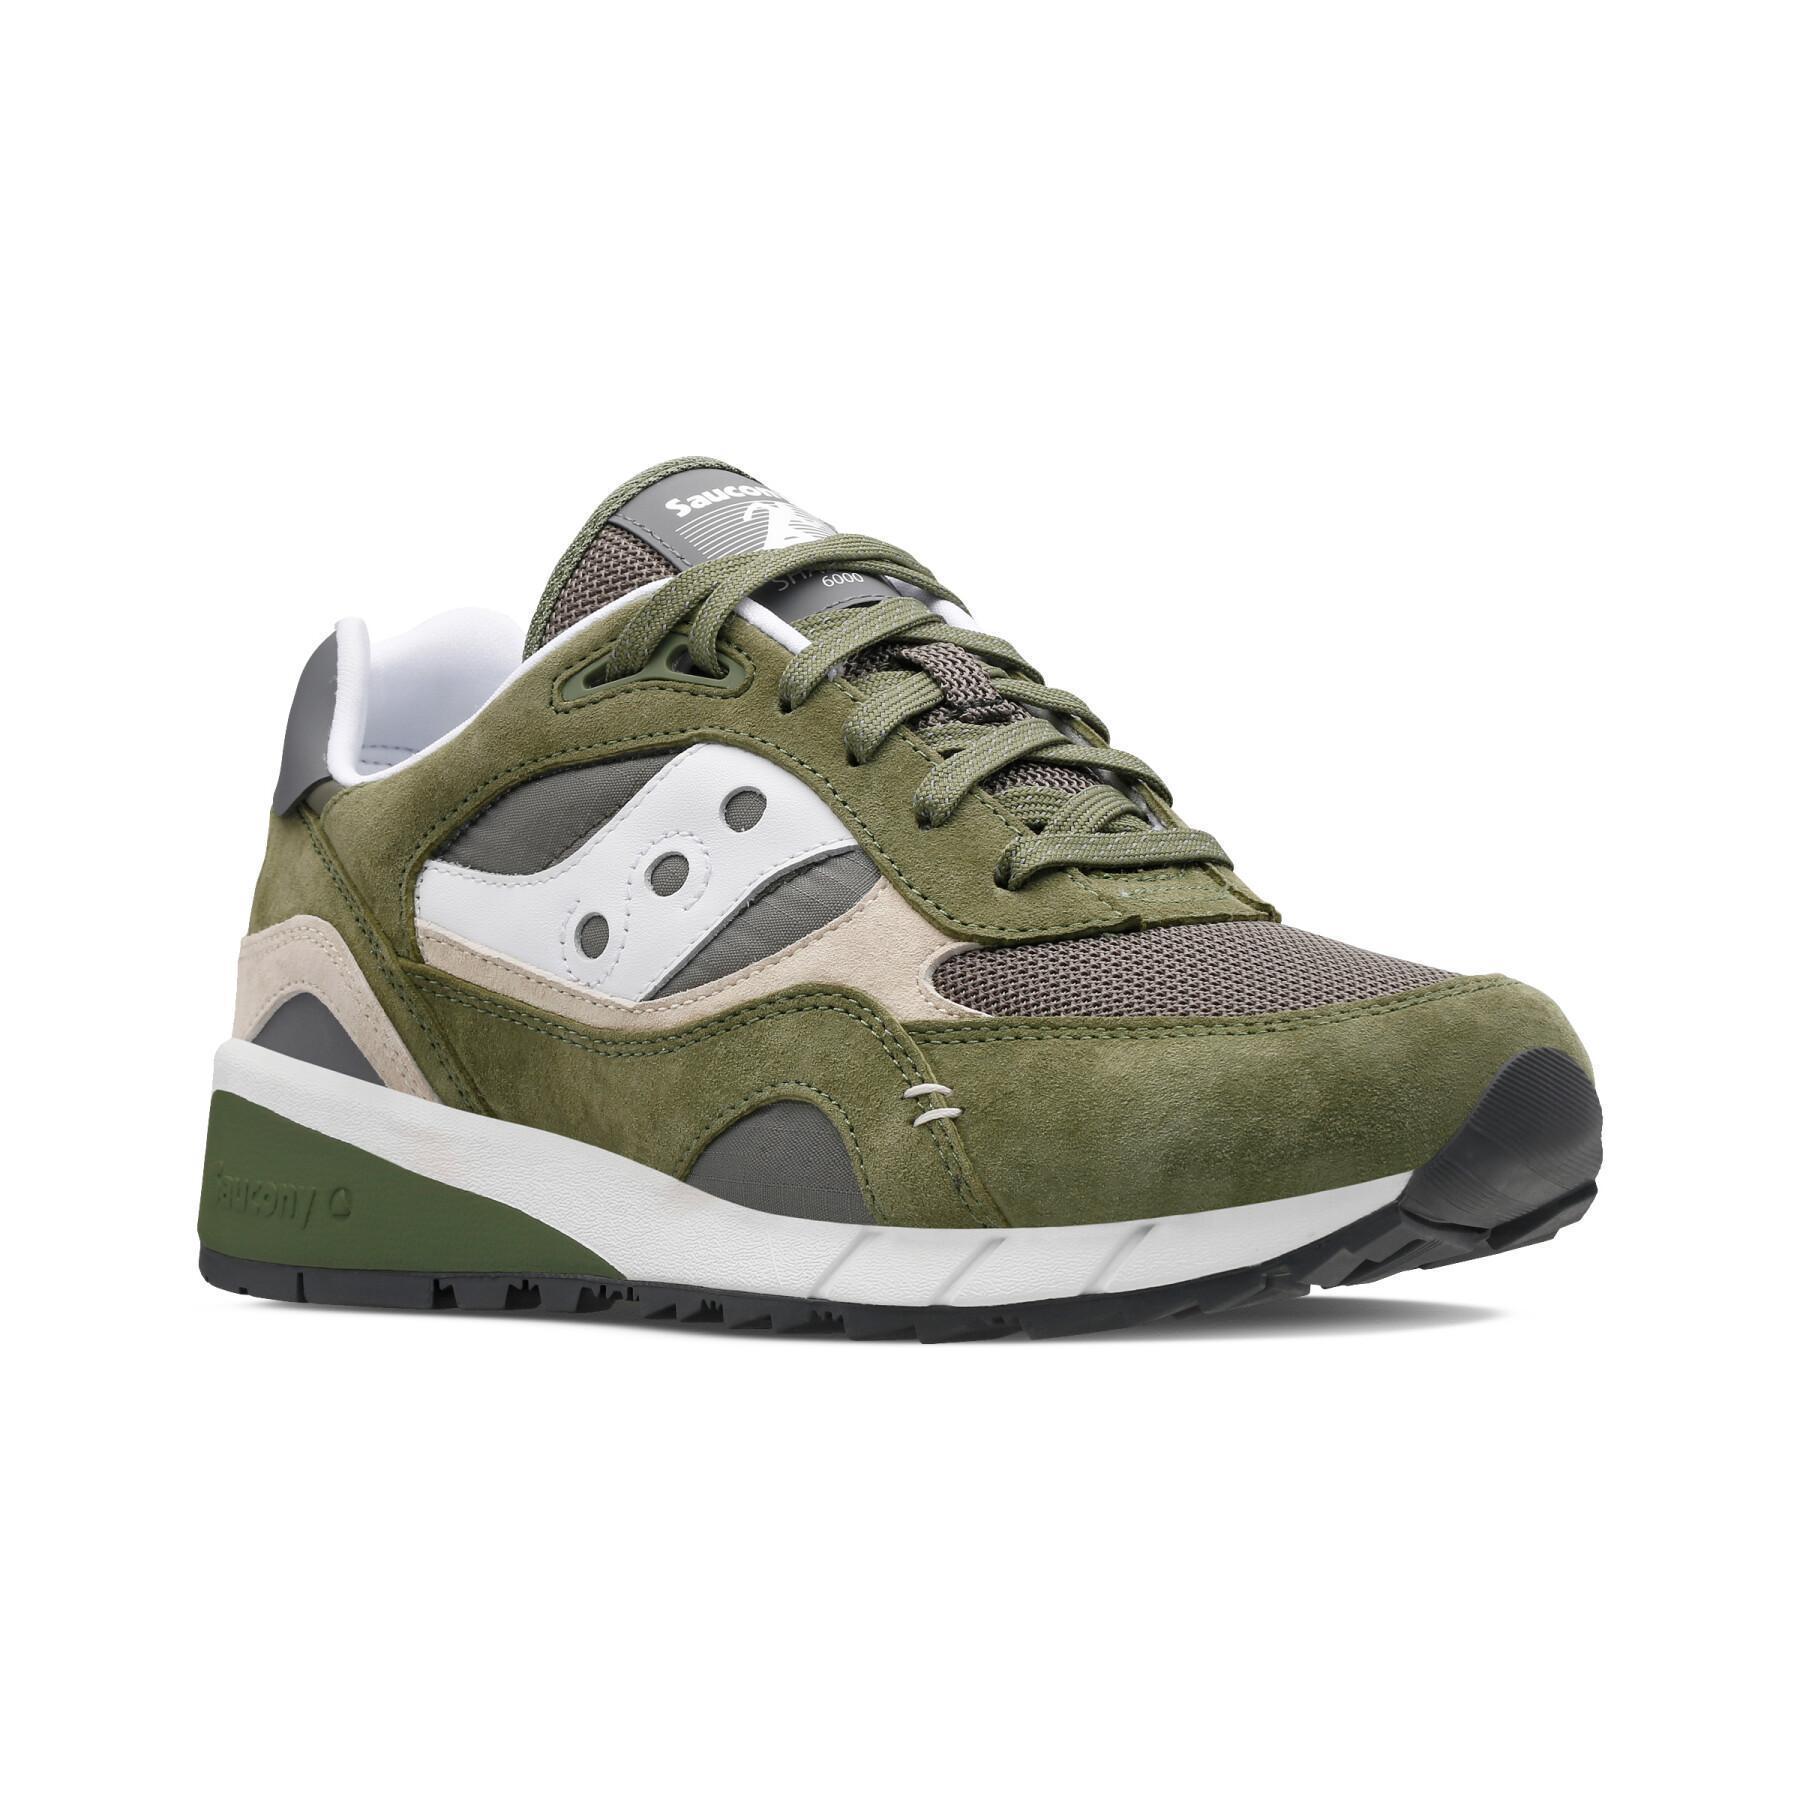 Shoes Saucony Shadow 6000